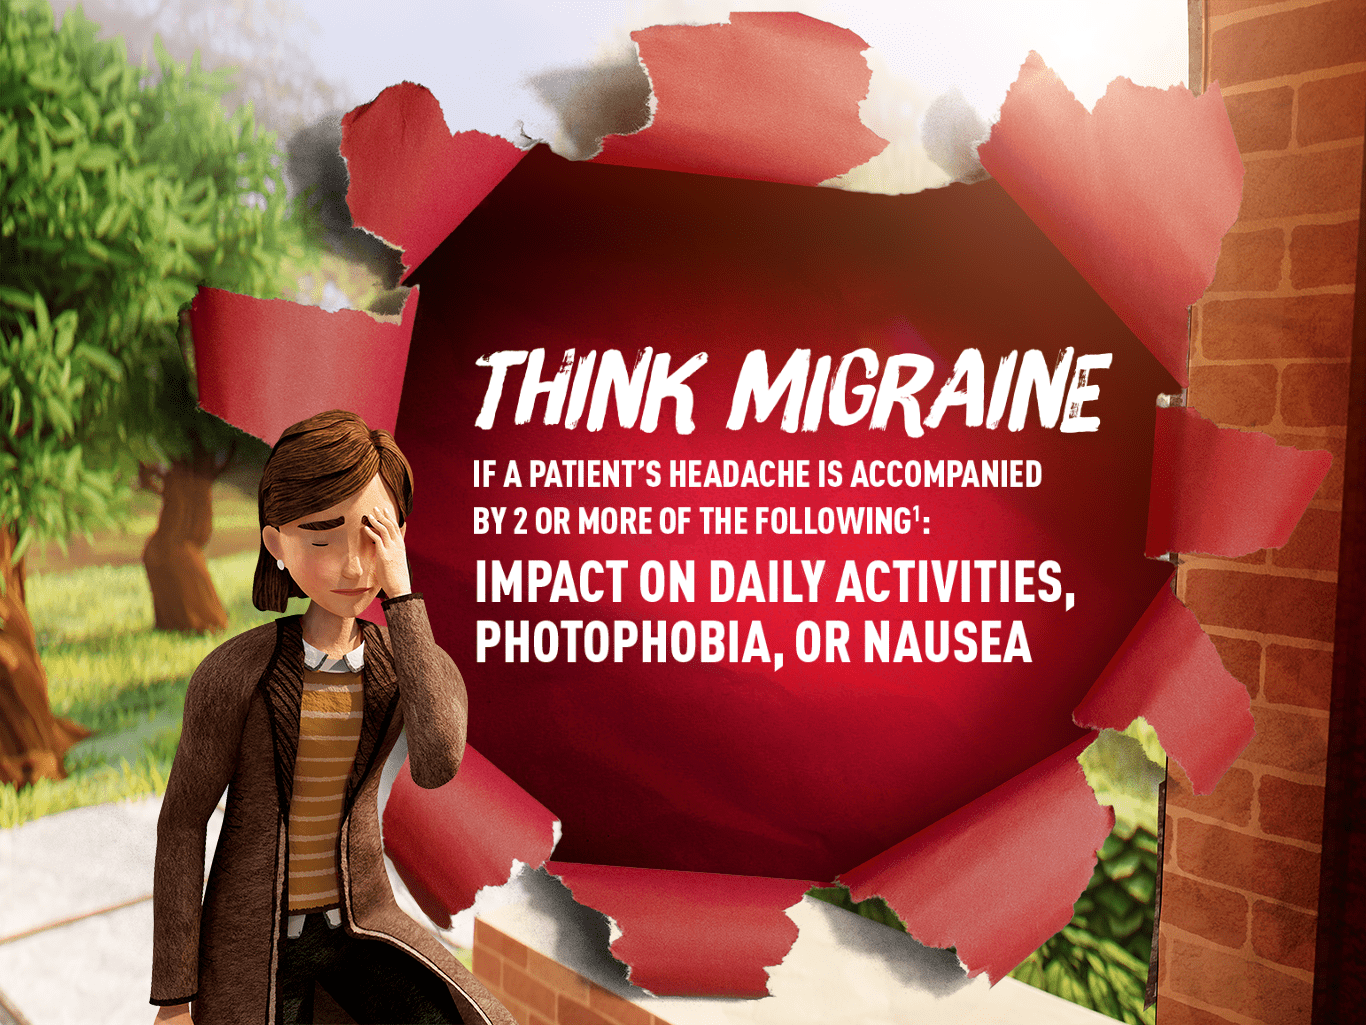 Think migraine if a patient's headache is accompanied by 2 or more of: impact on daily activities, photophobia, or nausea